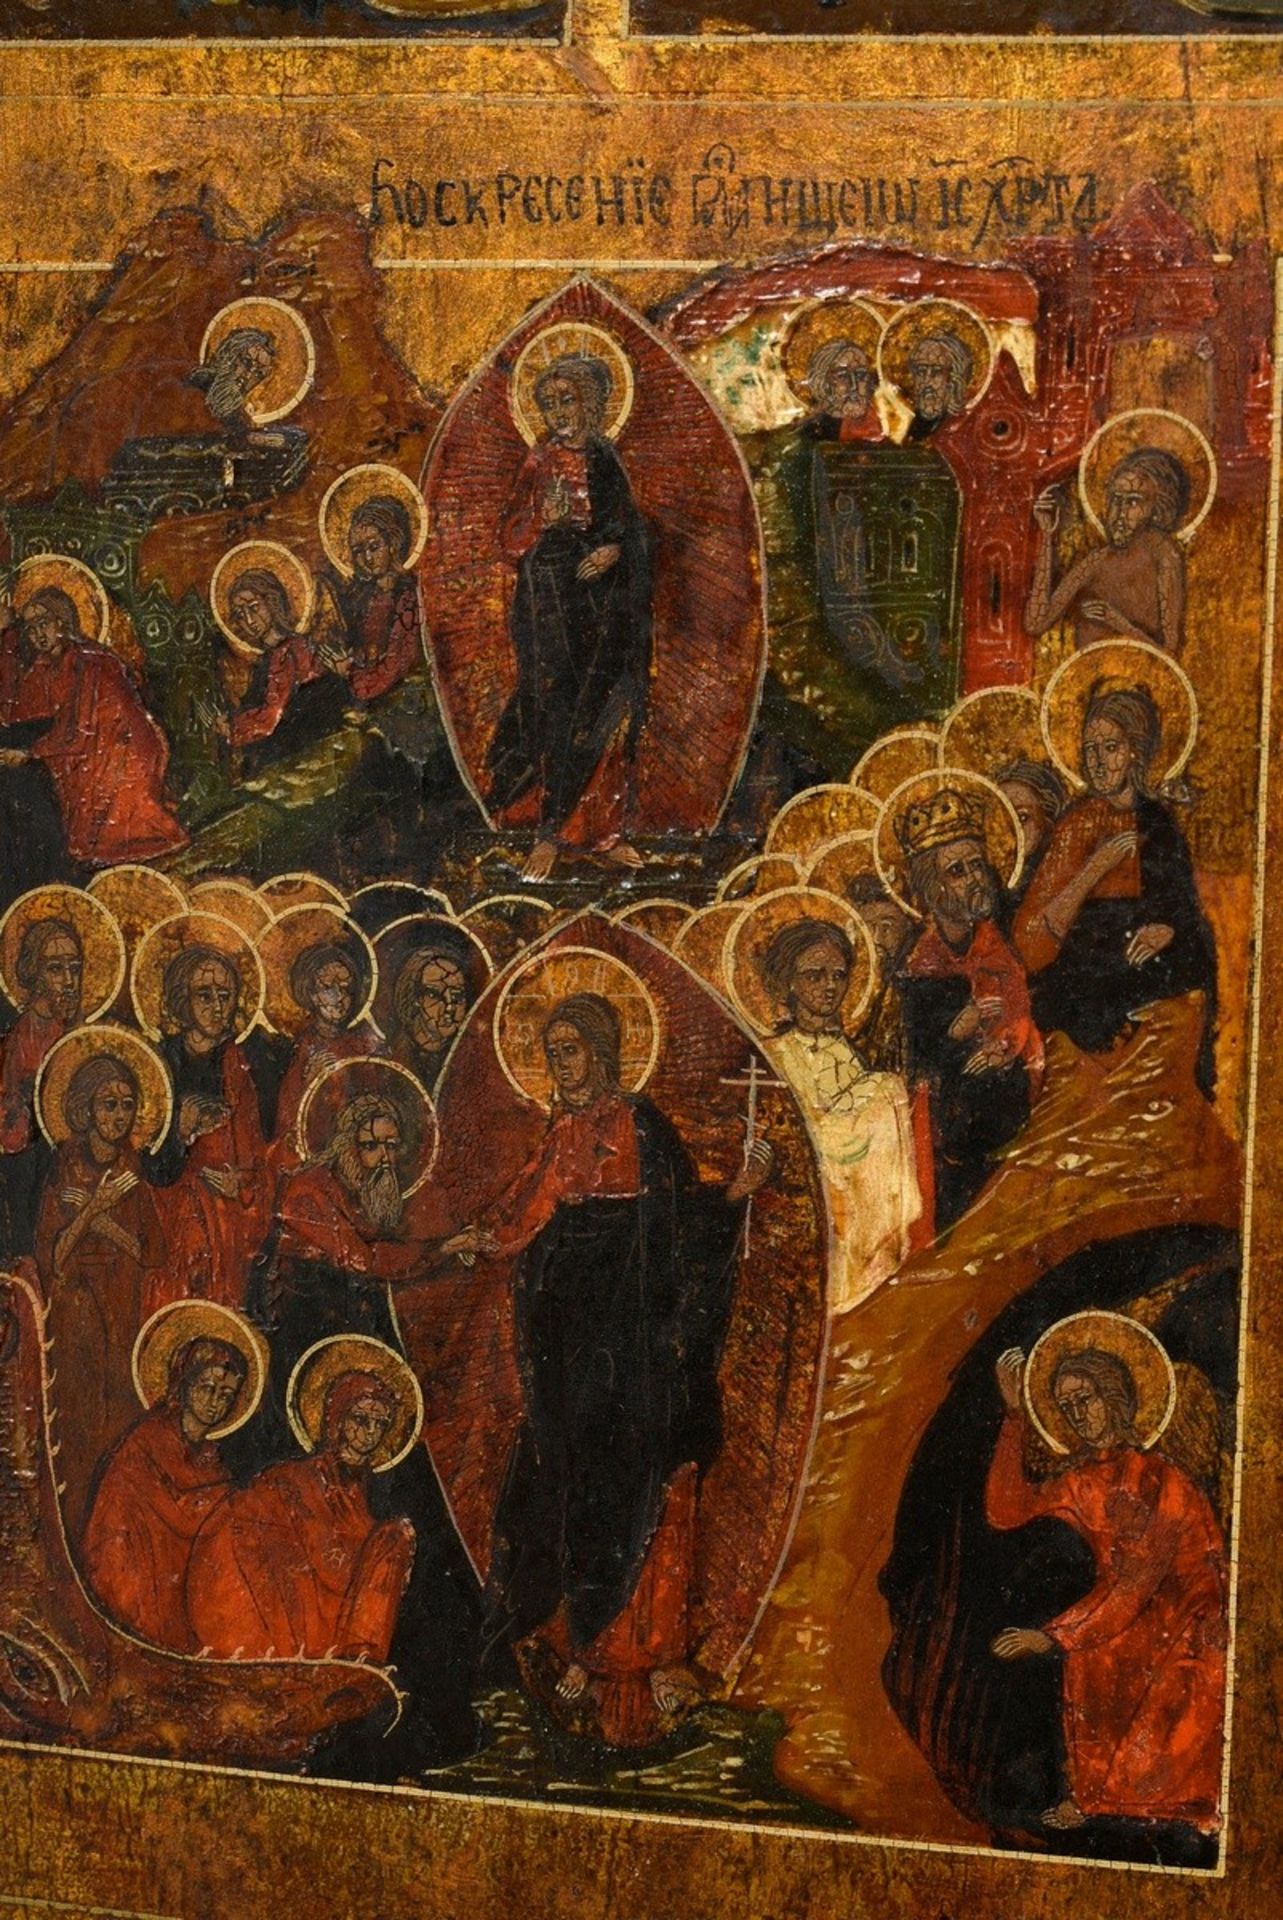 Central Russian feast day icon "Easter events, Ascension and Resurrection of Christ" in the central - Image 2 of 8